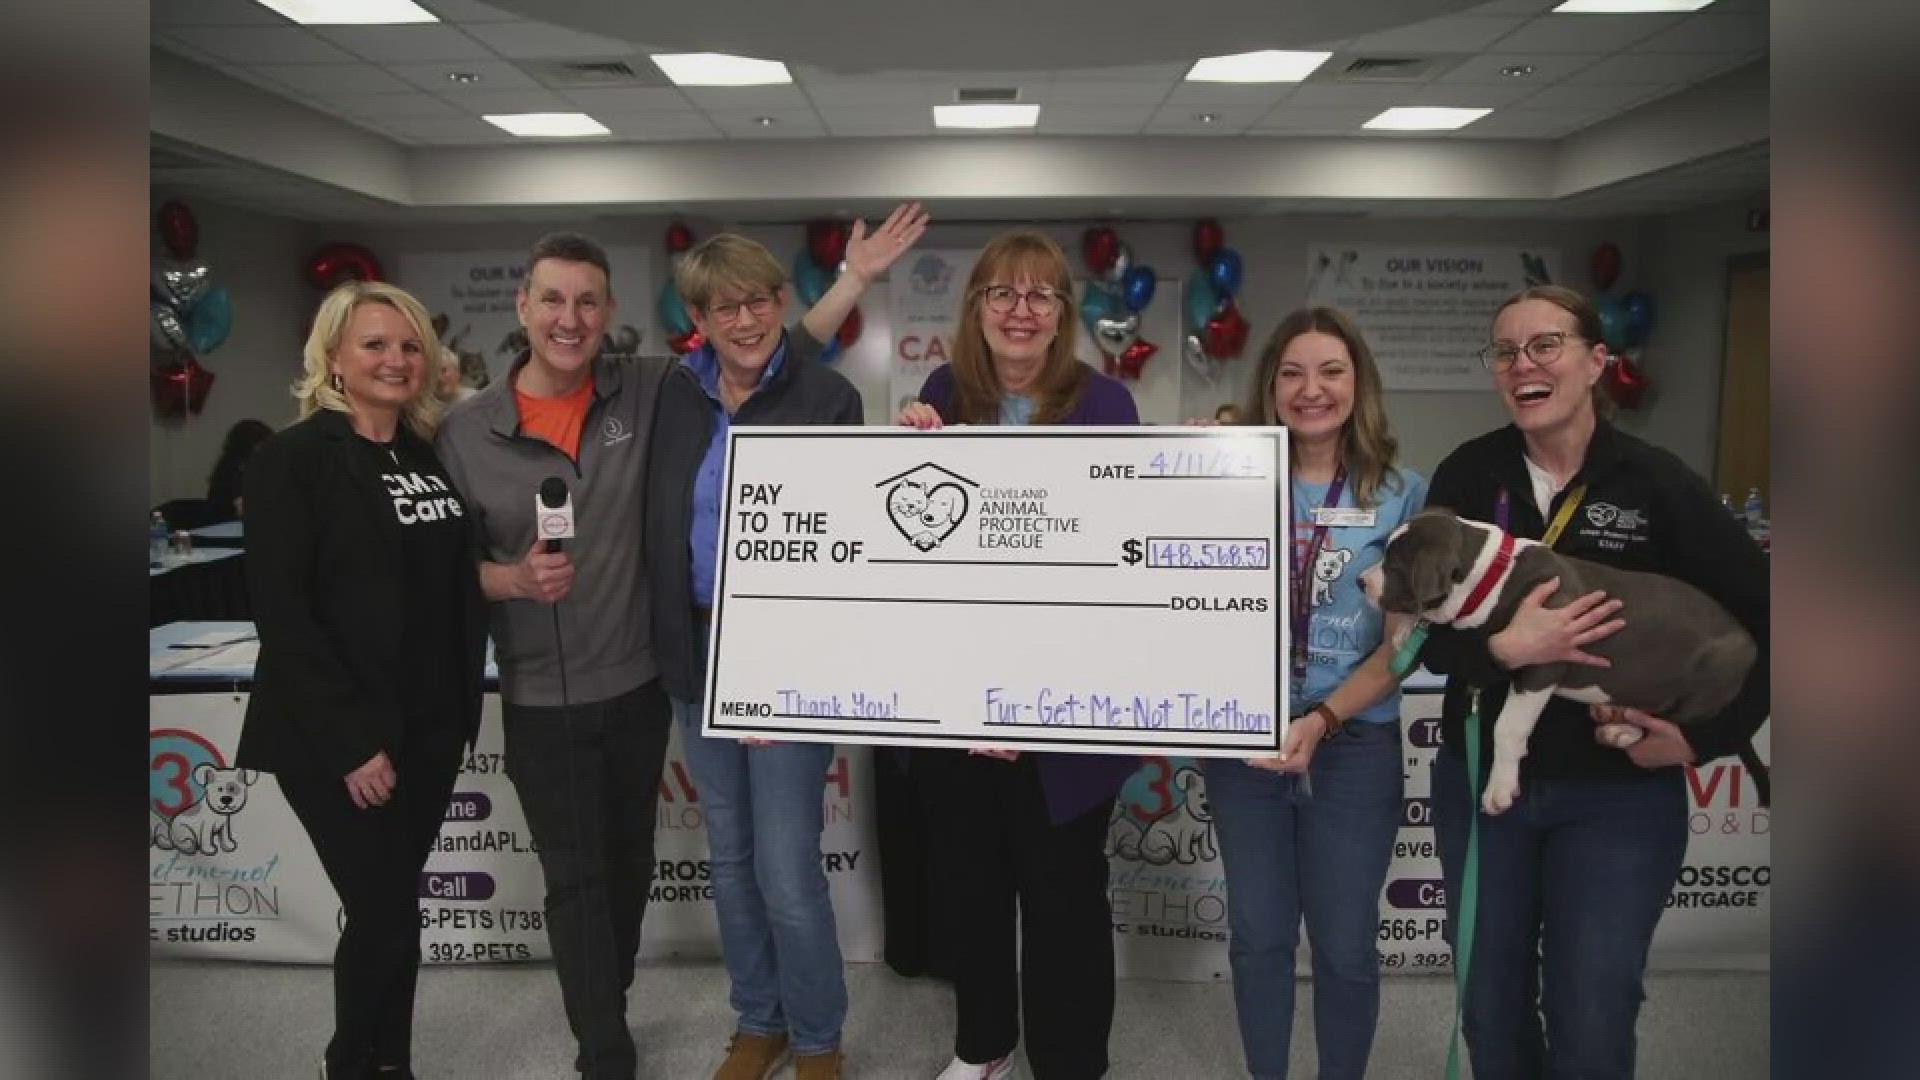 As of Thursday evening, the total money raised during the Fur-Get-Me-Not" Telethon thus far is $148,568.57.